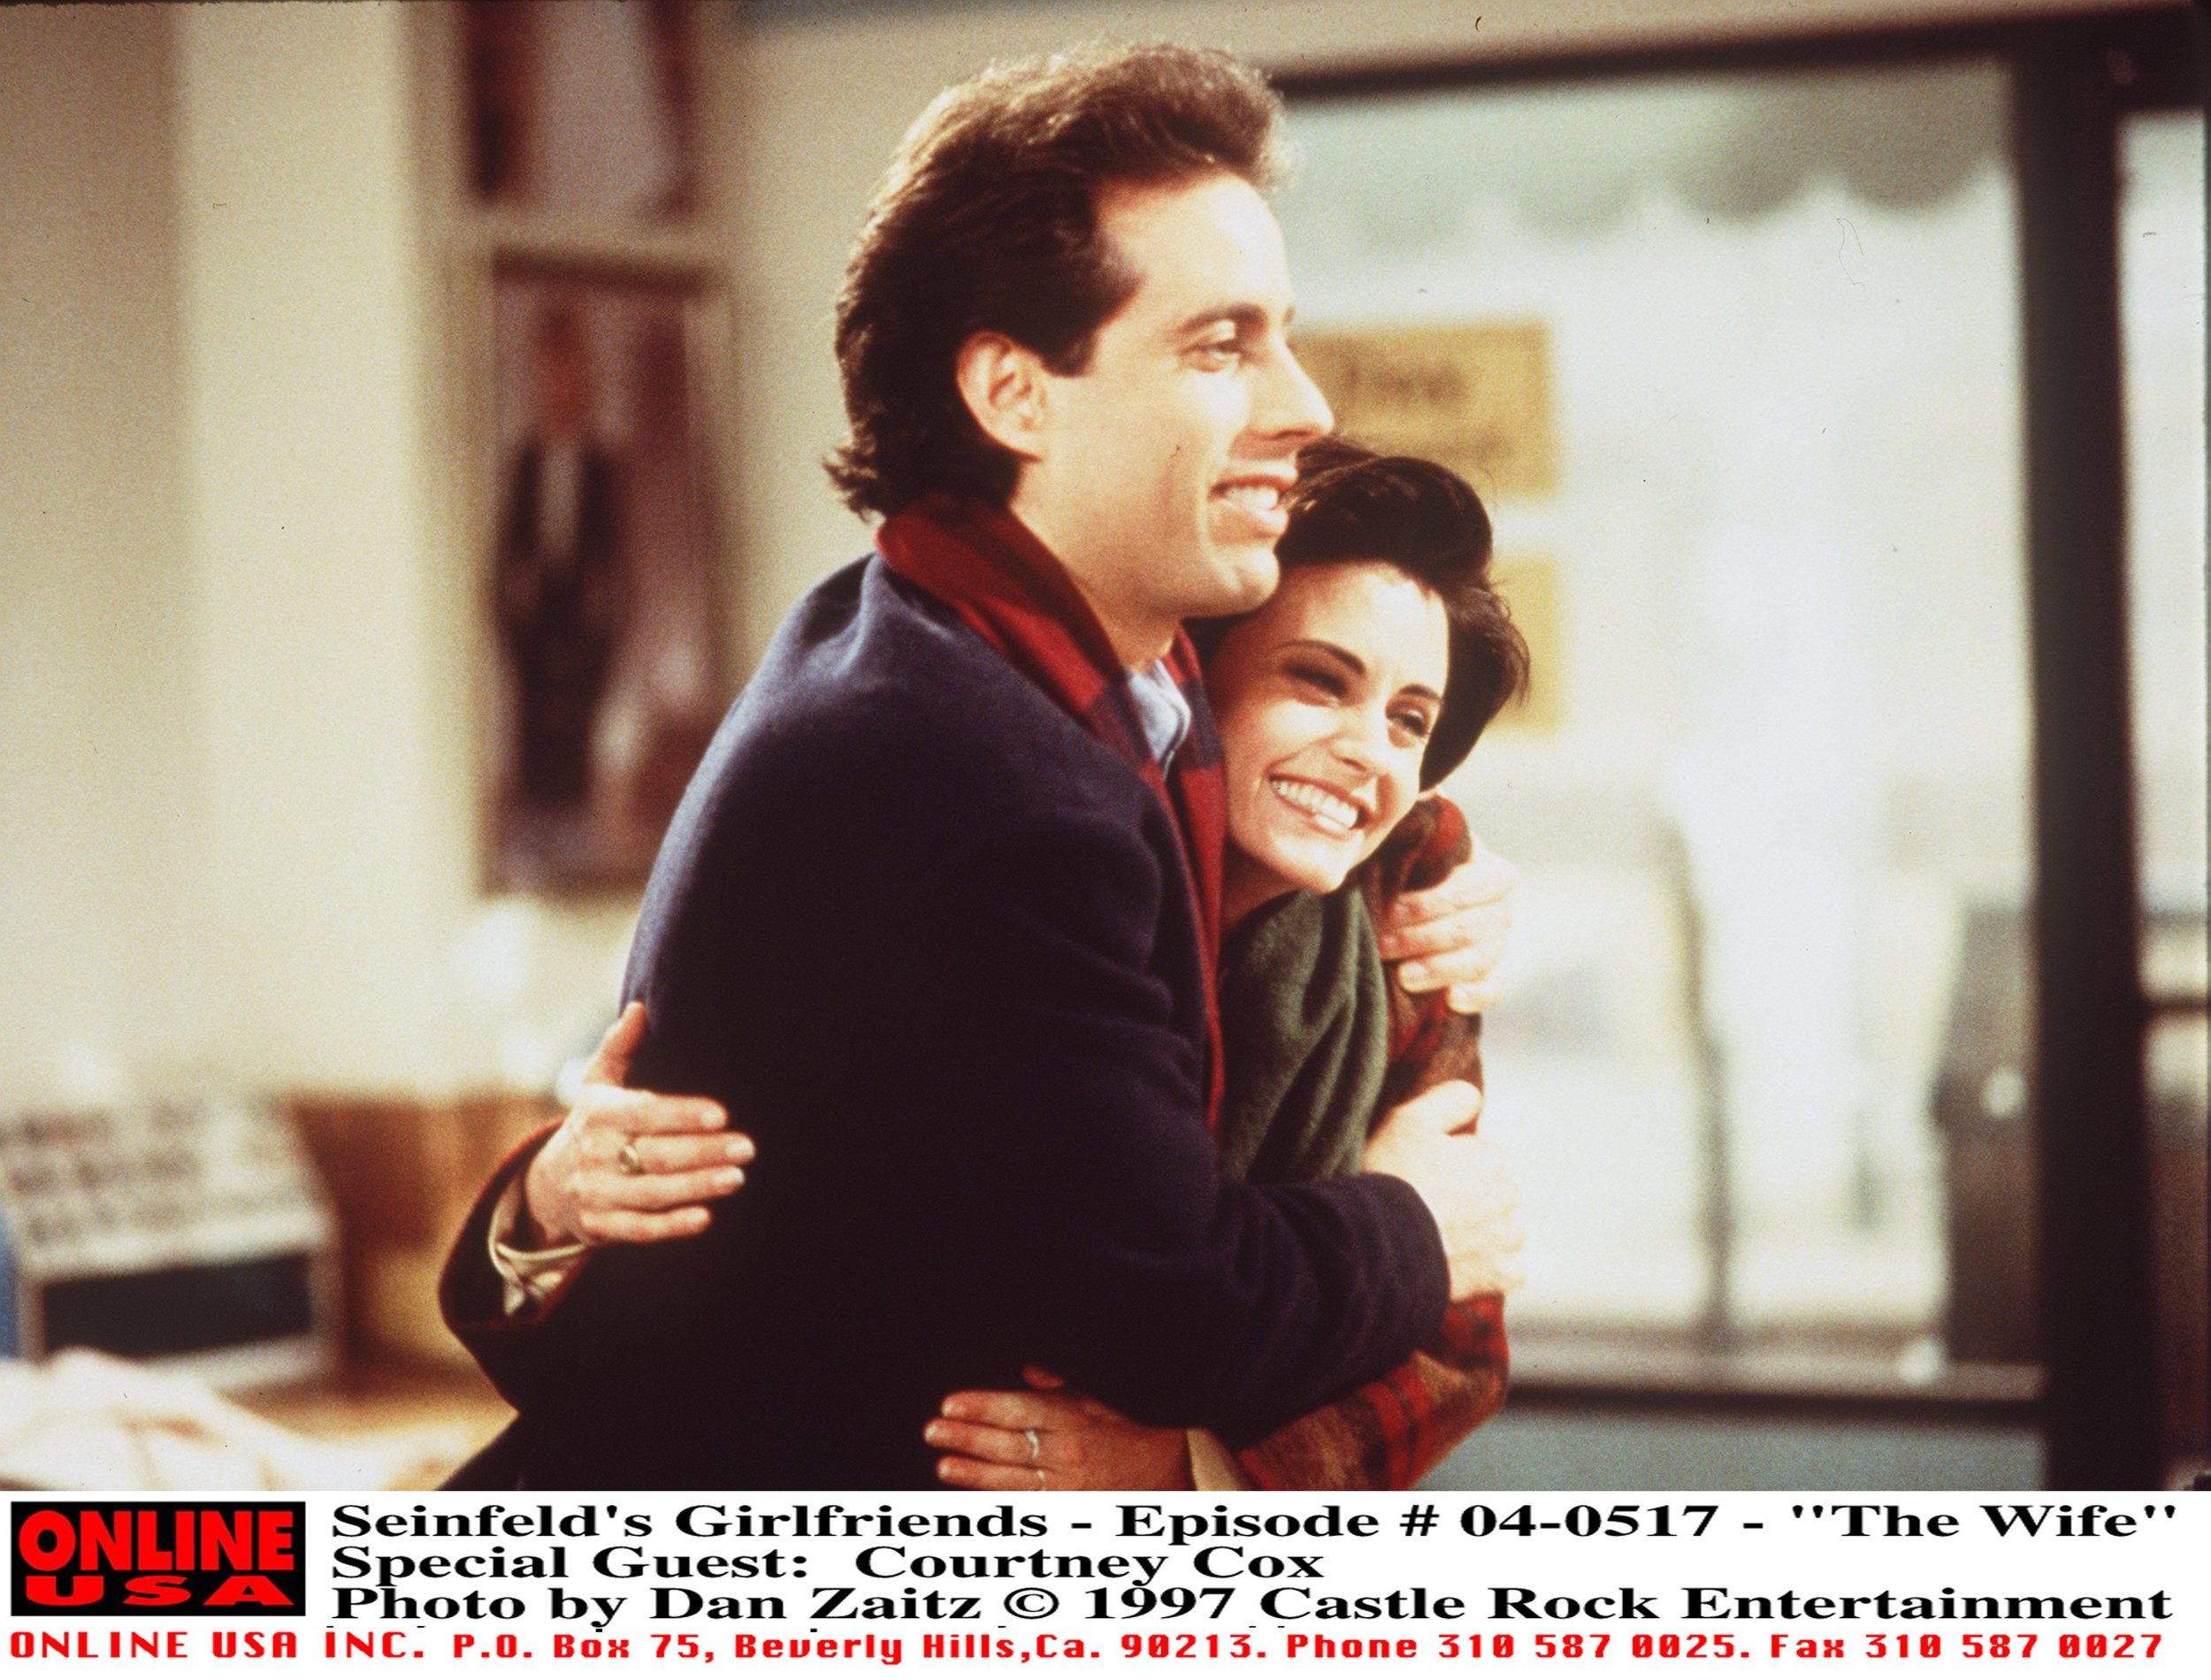 <p>Eventually Cox would be on arguably the only sitcom from the ‘90s comparable to “Seinfeld”: "Friends." Here, though, she plays one of the many women whom Jerry dated, and several of them went on to greater success. The casting agent for “Seinfeld” had an eye for talent.</p>